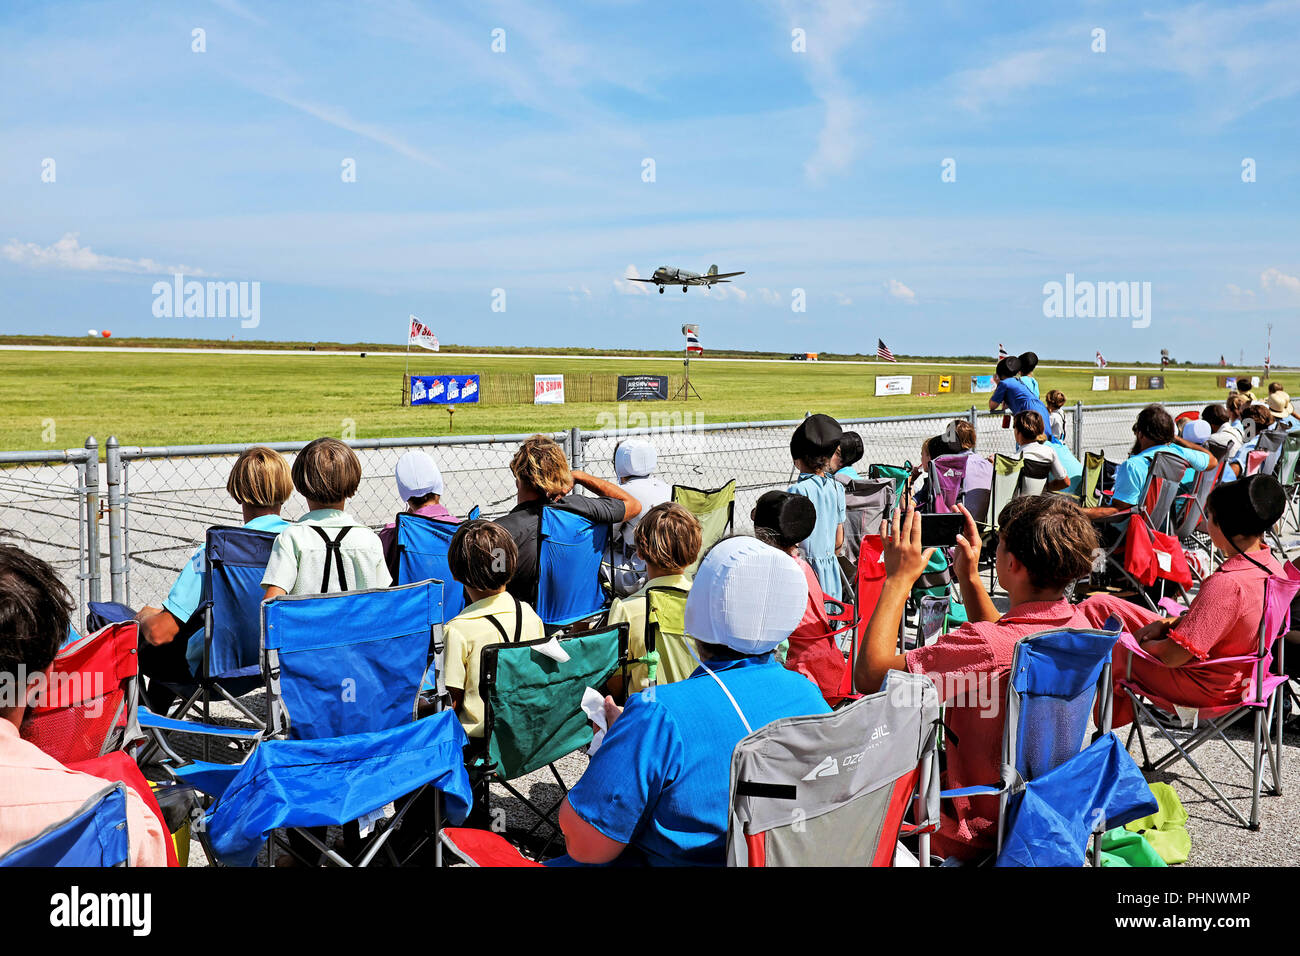 Cleveland, Ohio, USA, 1st Sept, 2018. Amish spectators watch the 54th Annual Cleveland National Air Show at Burke Lakefront Airport in Cleveland, Ohio.  This annual event marks the unofficial end of summer being held annually over the US Labor Day holiday weekend.  Credit: Mark Kanning/Alamy Live News. Stock Photo